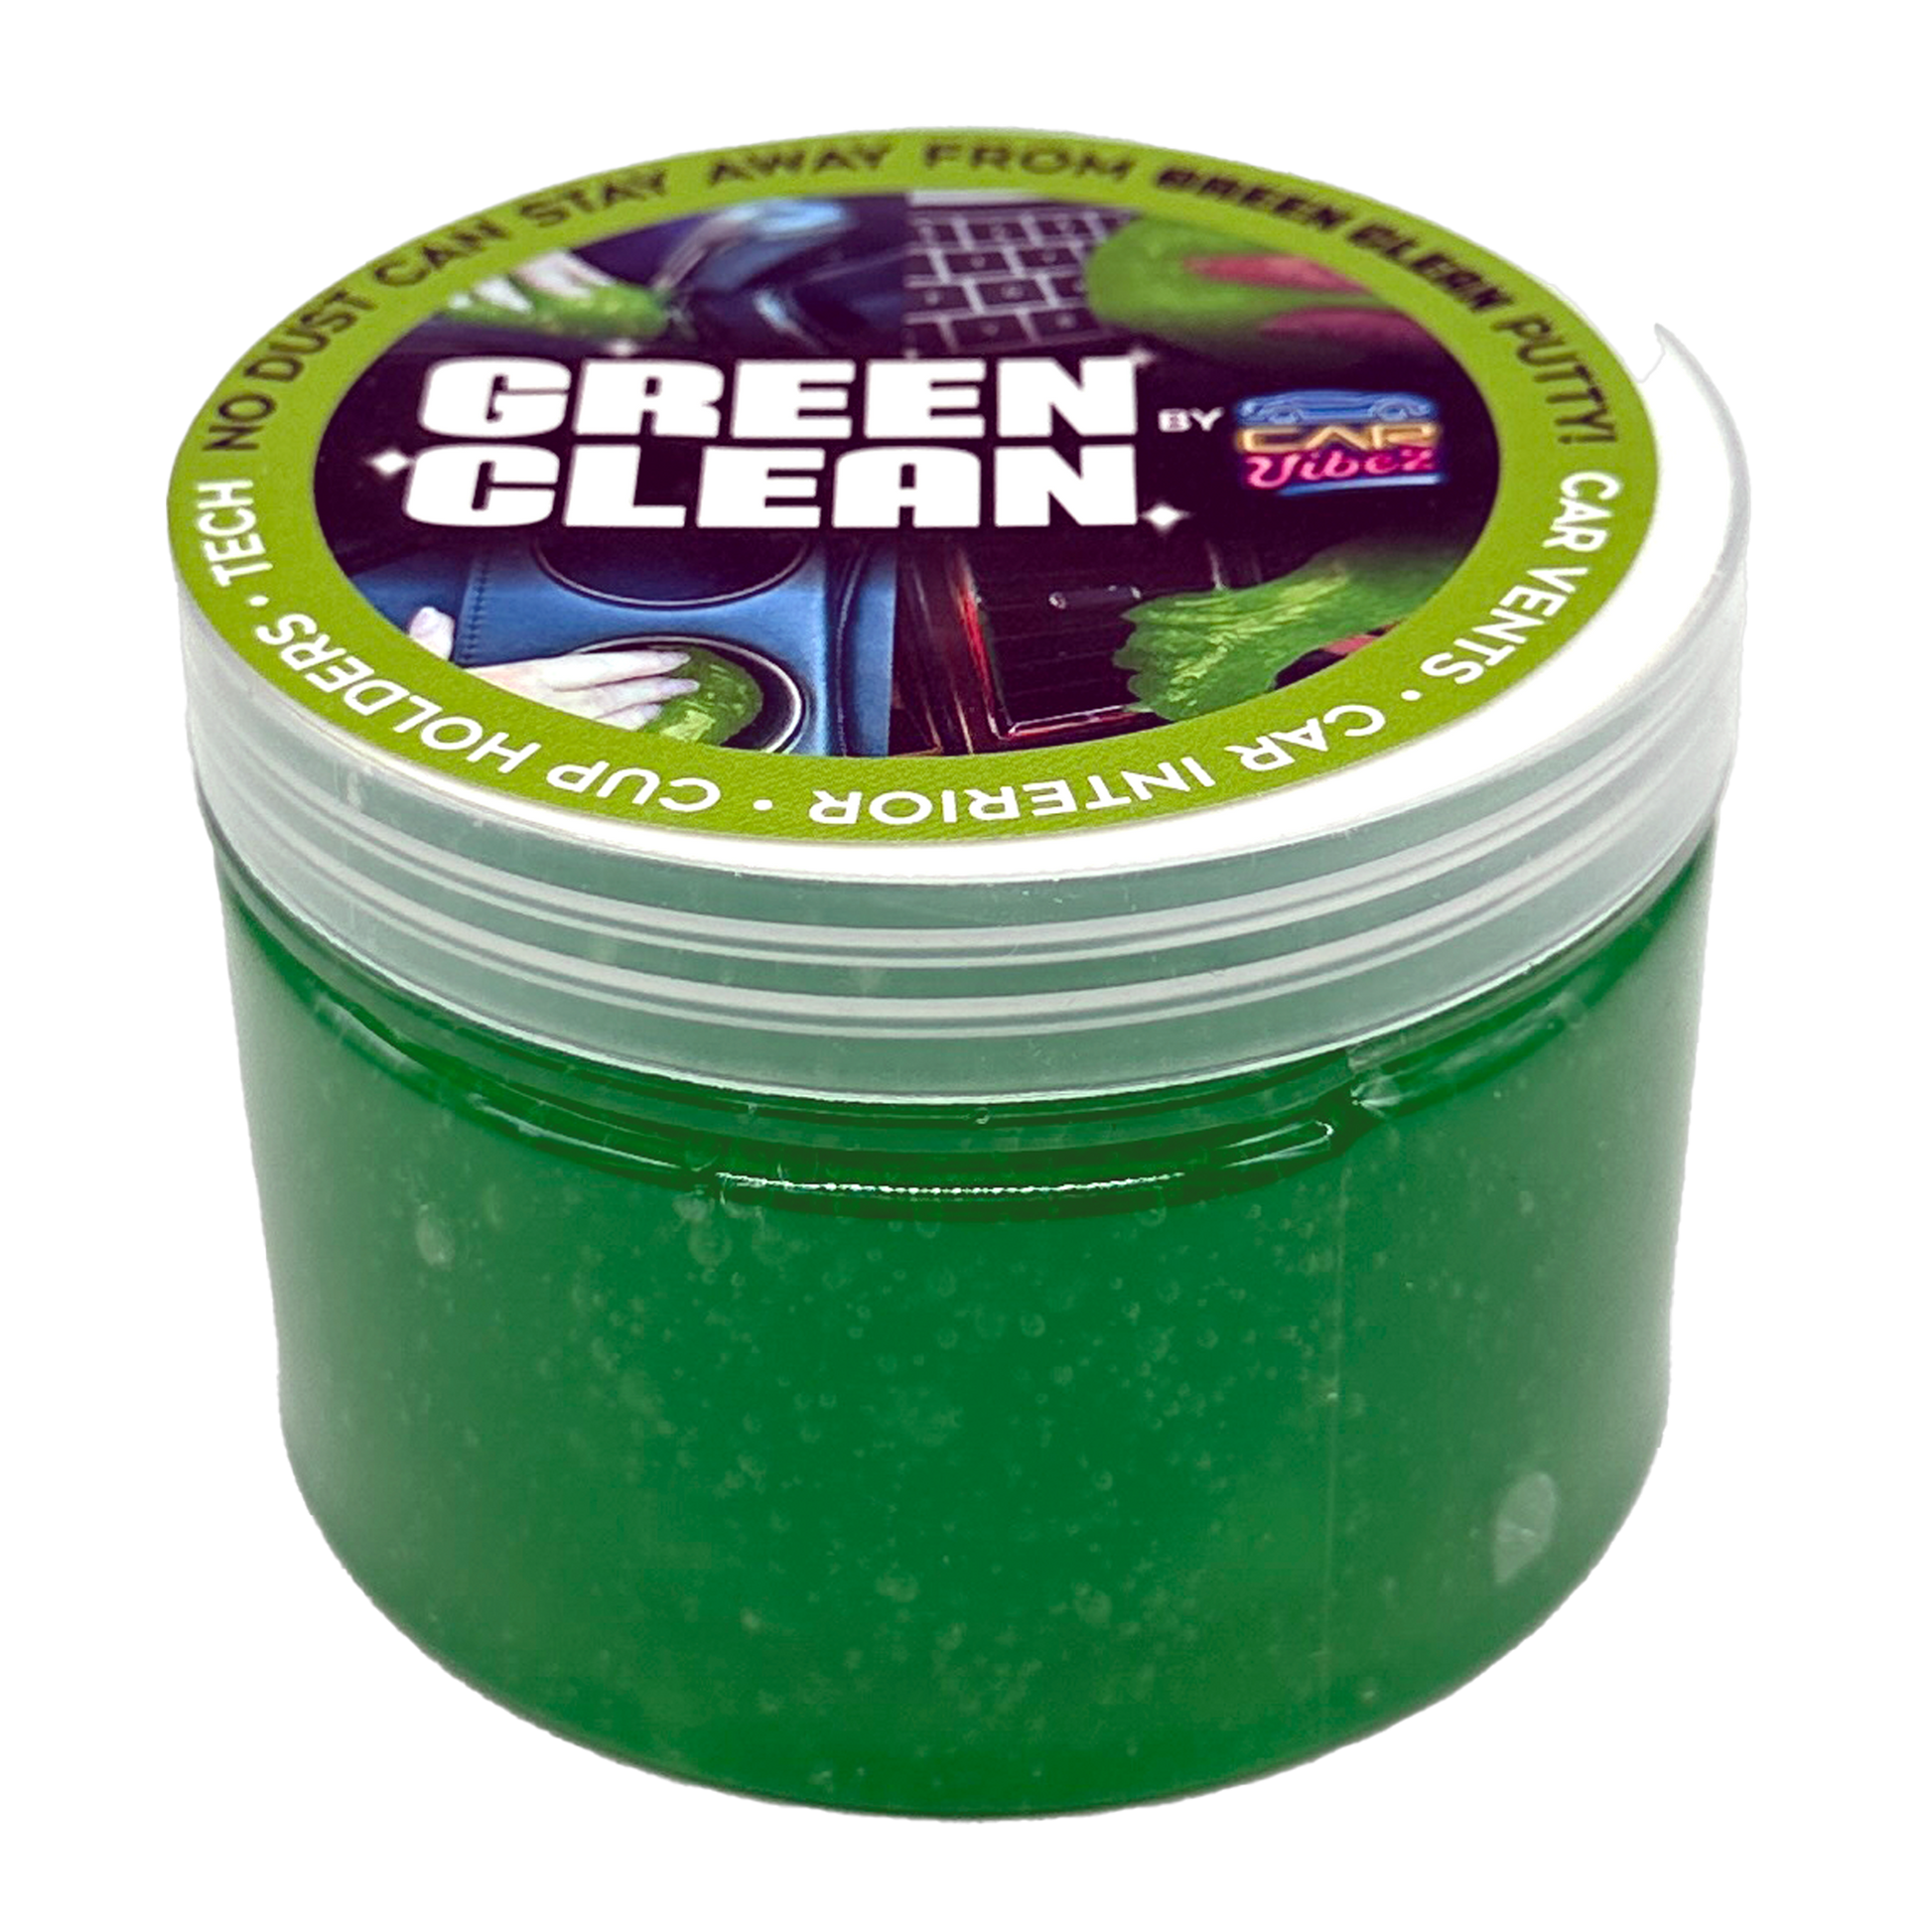 ITEM NUMBER 023718L GREEN CLEAN CAR PUTTY - STORE SURPLUS NO DISPLAY 6 –  Novelty Closeout